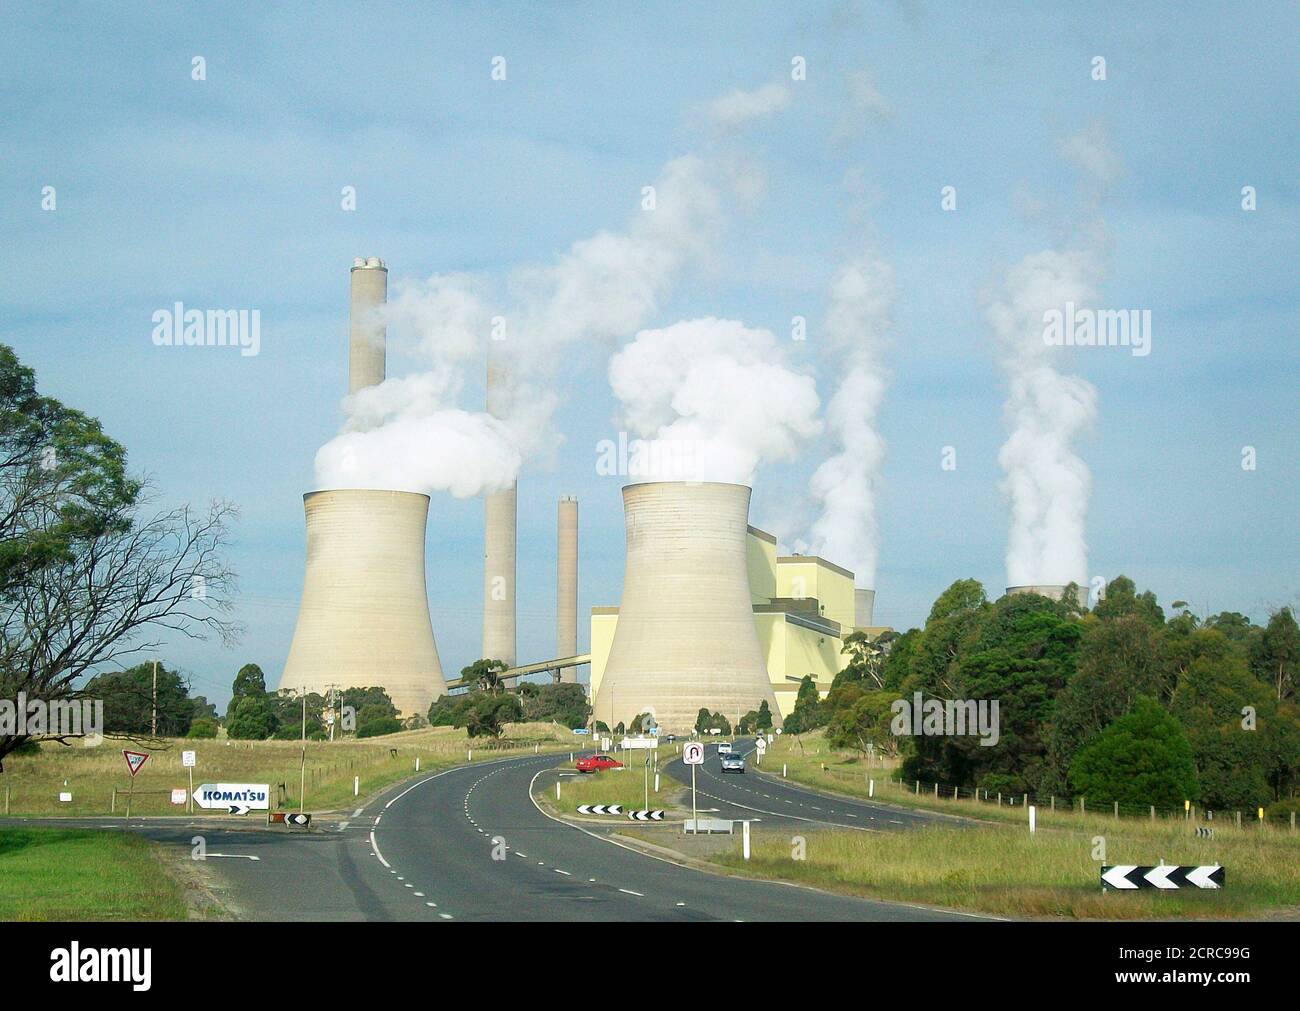 Vapour rises from cooling towers at the Loy Yang coal fired power station, about 150 km (93 miles) east of Melbourne in Victoria state April 2, 2012. After years of wrenching debate, a carbon tax on Australian industry starts in July, but instead of bringing much-needed investment certainty, the scheme is delivering the opposite. Picture taken April 2, 2012.  REUTERS/Sonali Paul (AUSTRALIA - Tags: ENVIRONMENT ENERGY POLITICS BUSINESS) Stock Photo